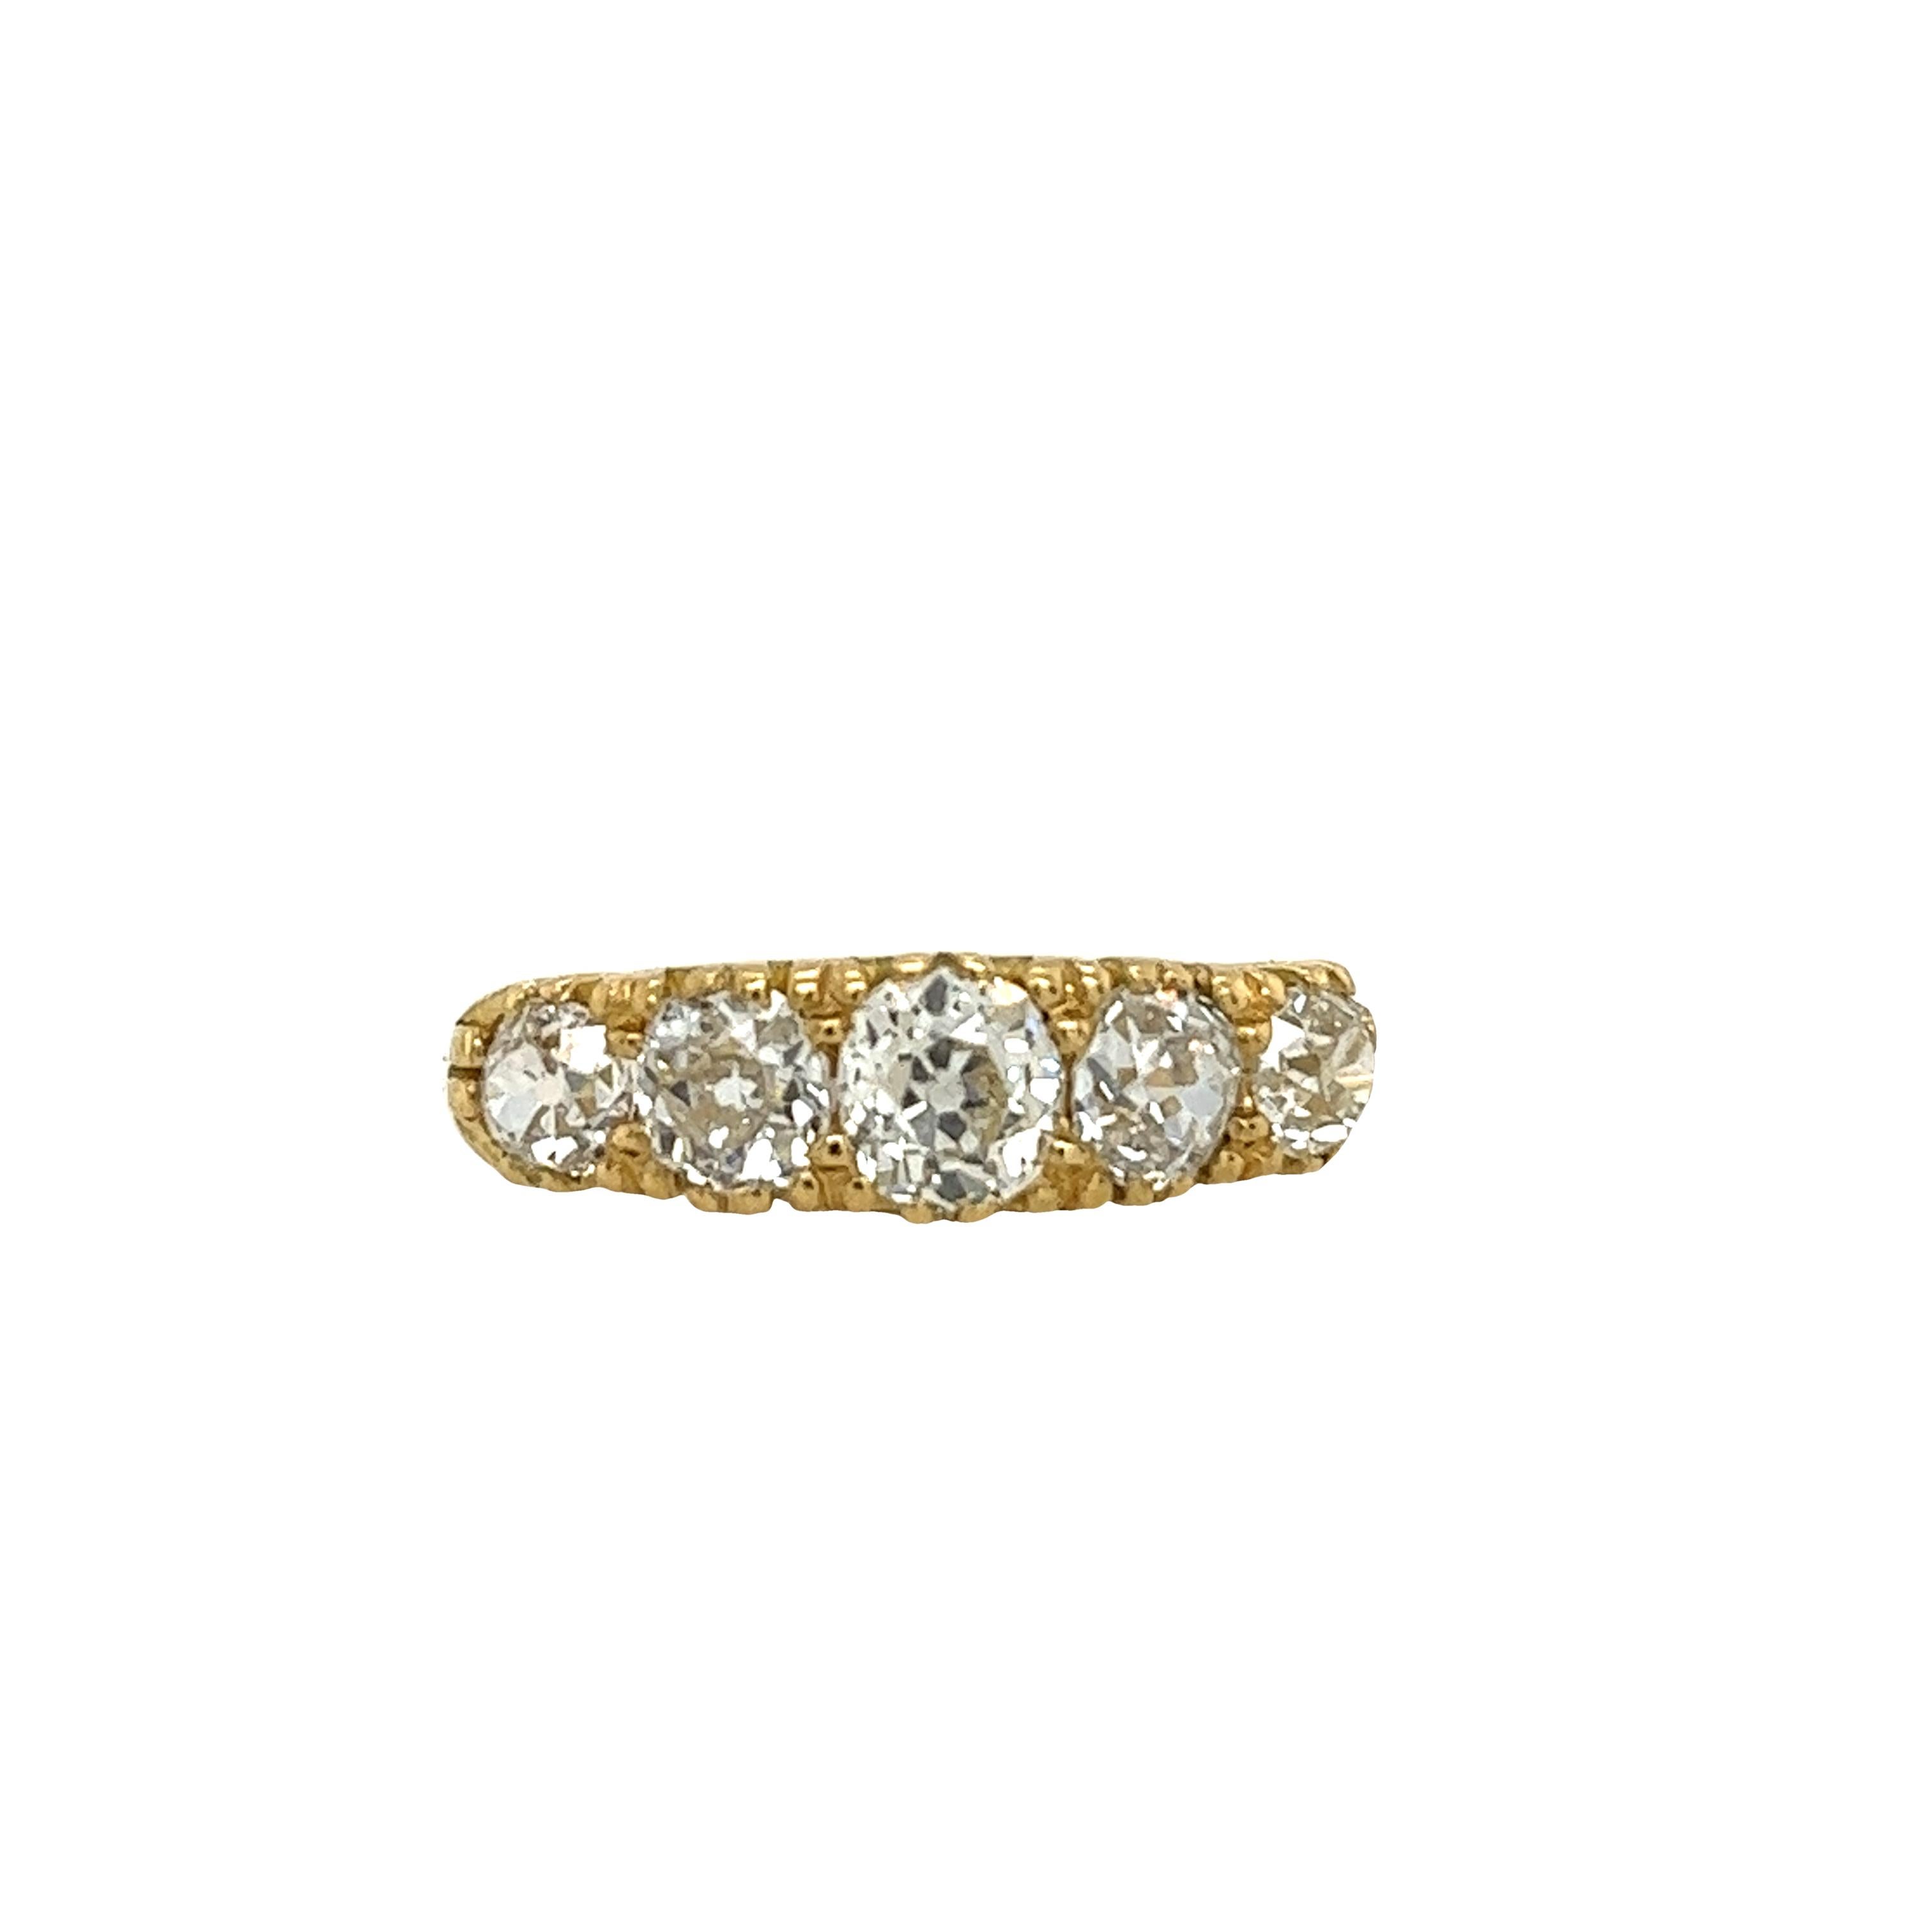 Round Cut Vintage 18ct Yellow Gold Diamond 5 Stone Ring, 1.95ct Total Diamond Weight. For Sale